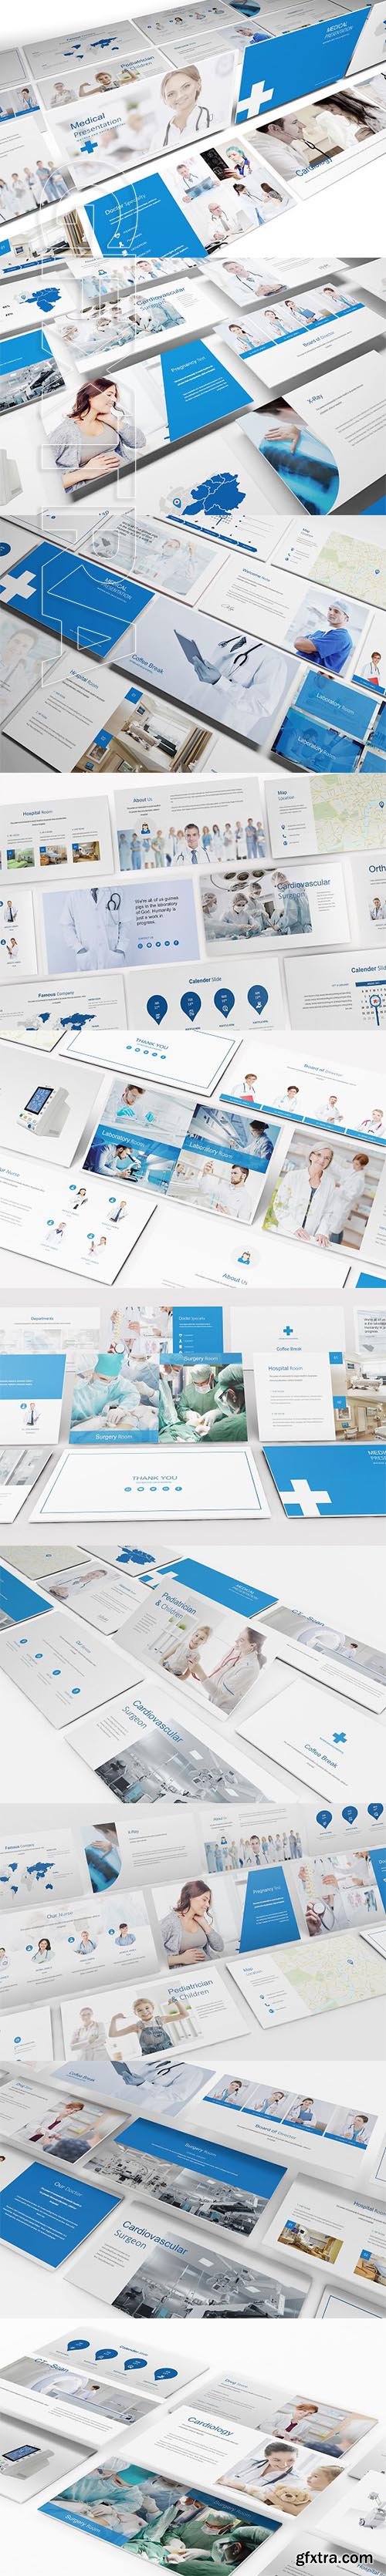 CreativeMarket - Medical and Hospital Powerpoint 2314681